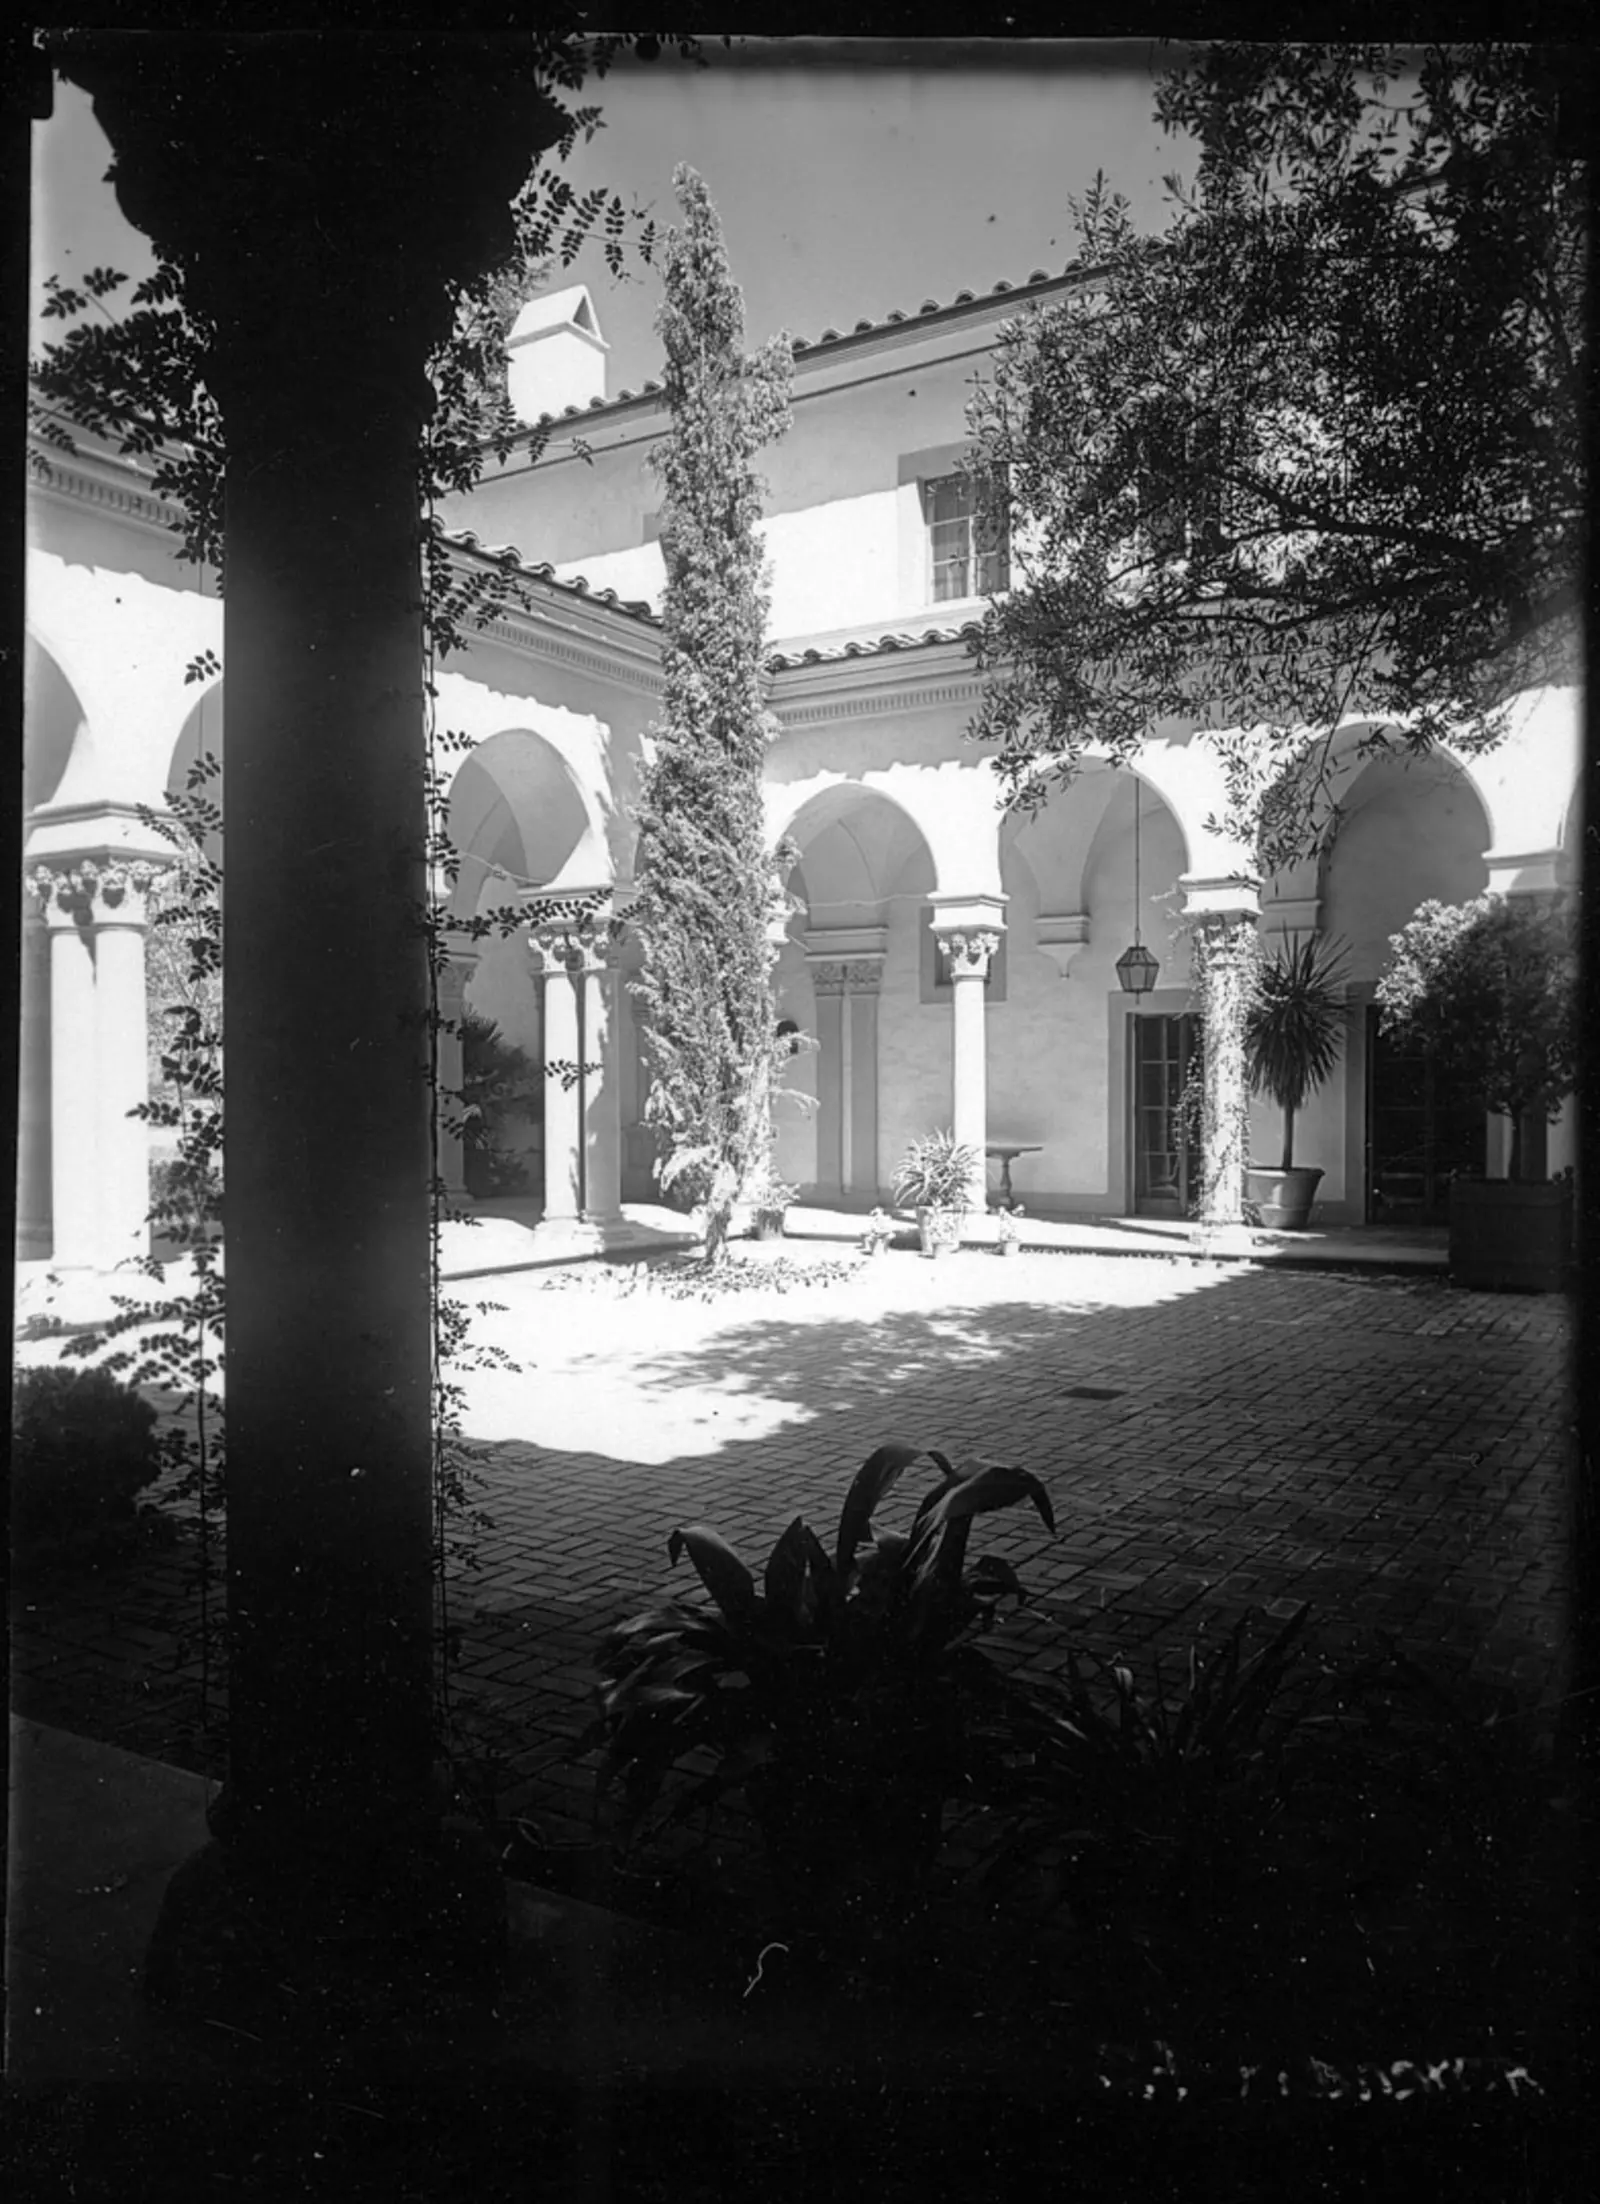 A black-and-white photo of an open courtyard with columns and arches, surrounded by foliage.